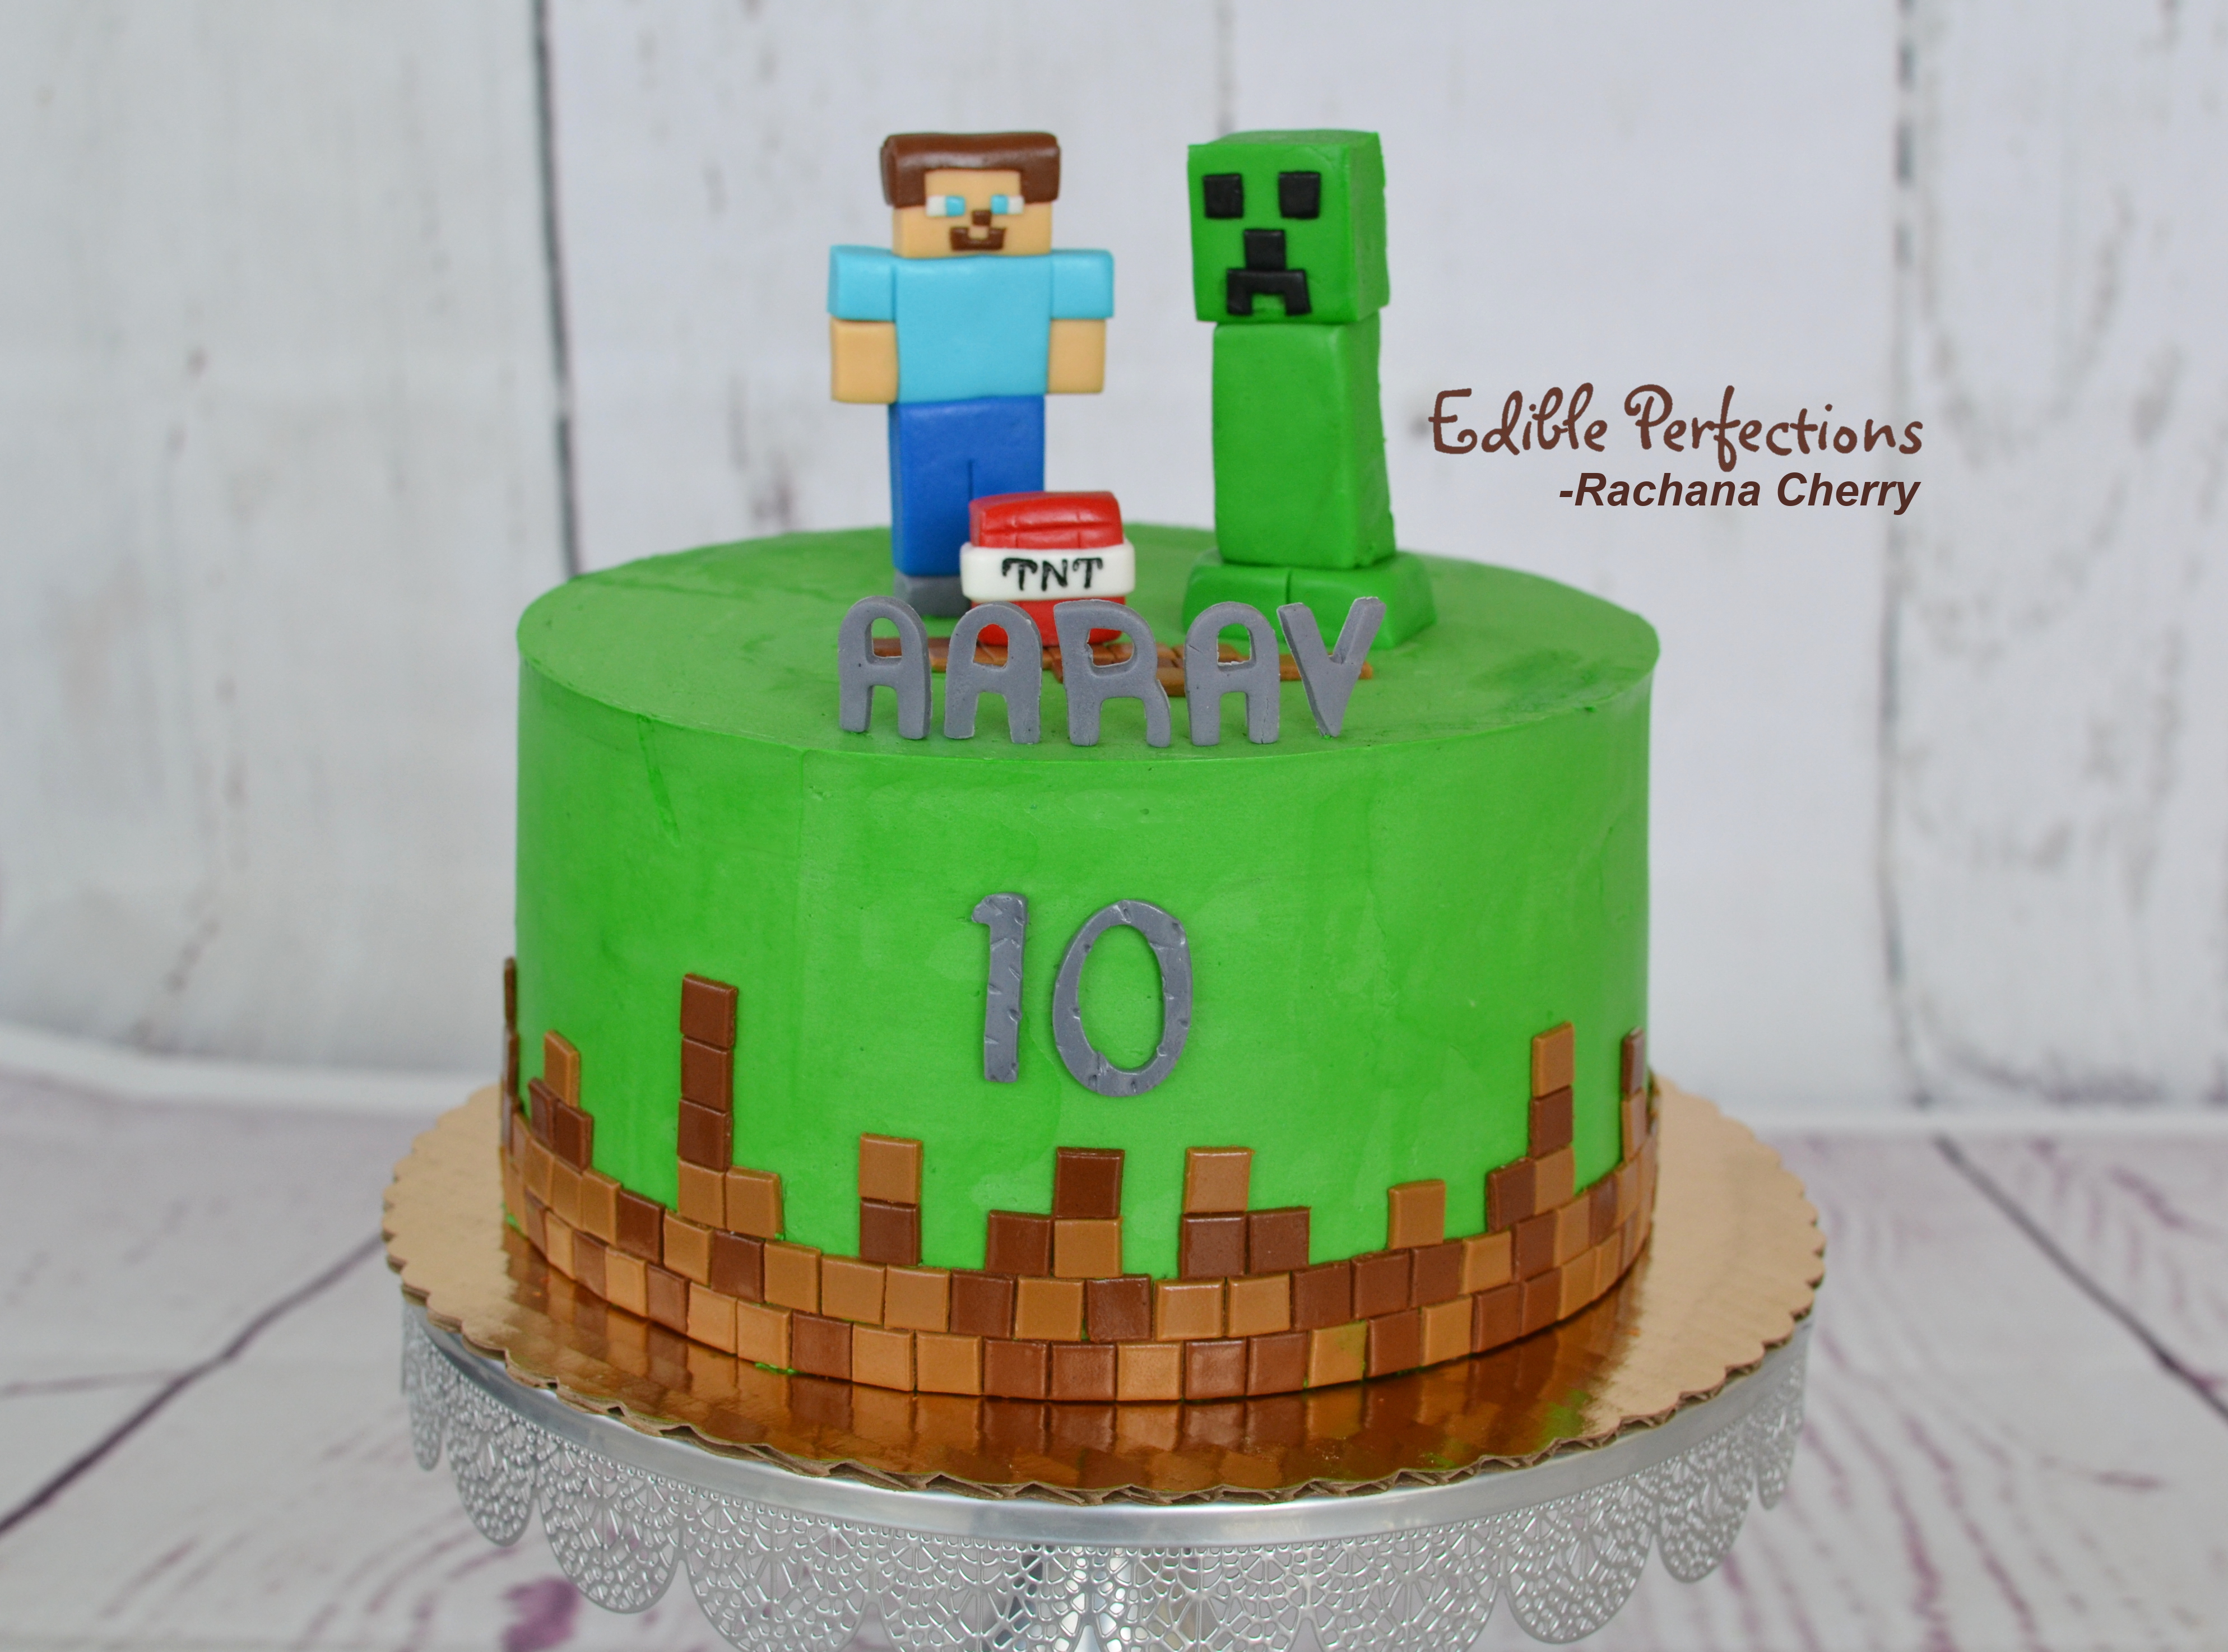 Minecraft Cake Edible Perfections